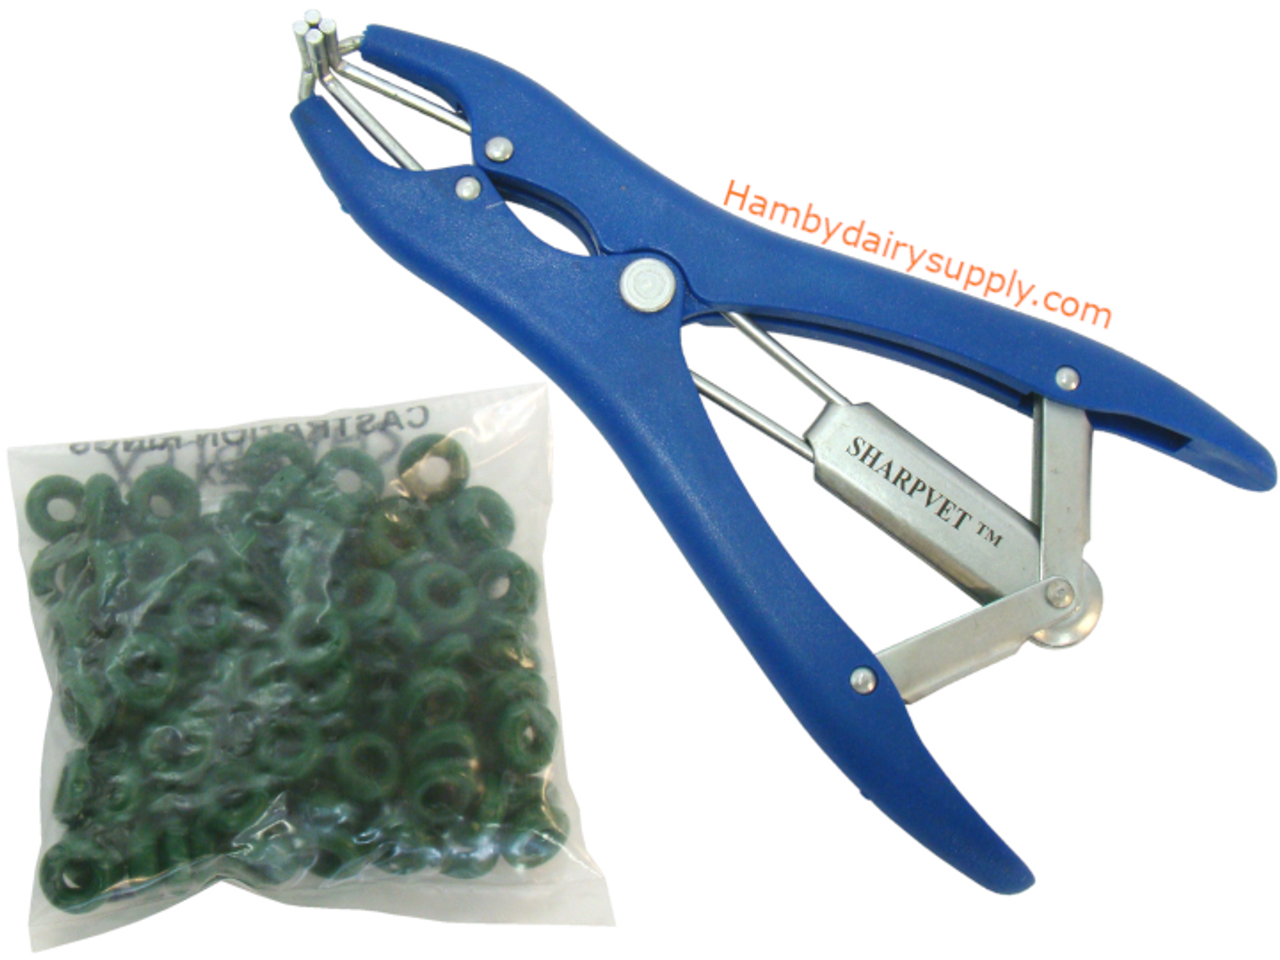 Sale! Castrating Kit for calves, kids, or lambs - Hamby Dairy Supply